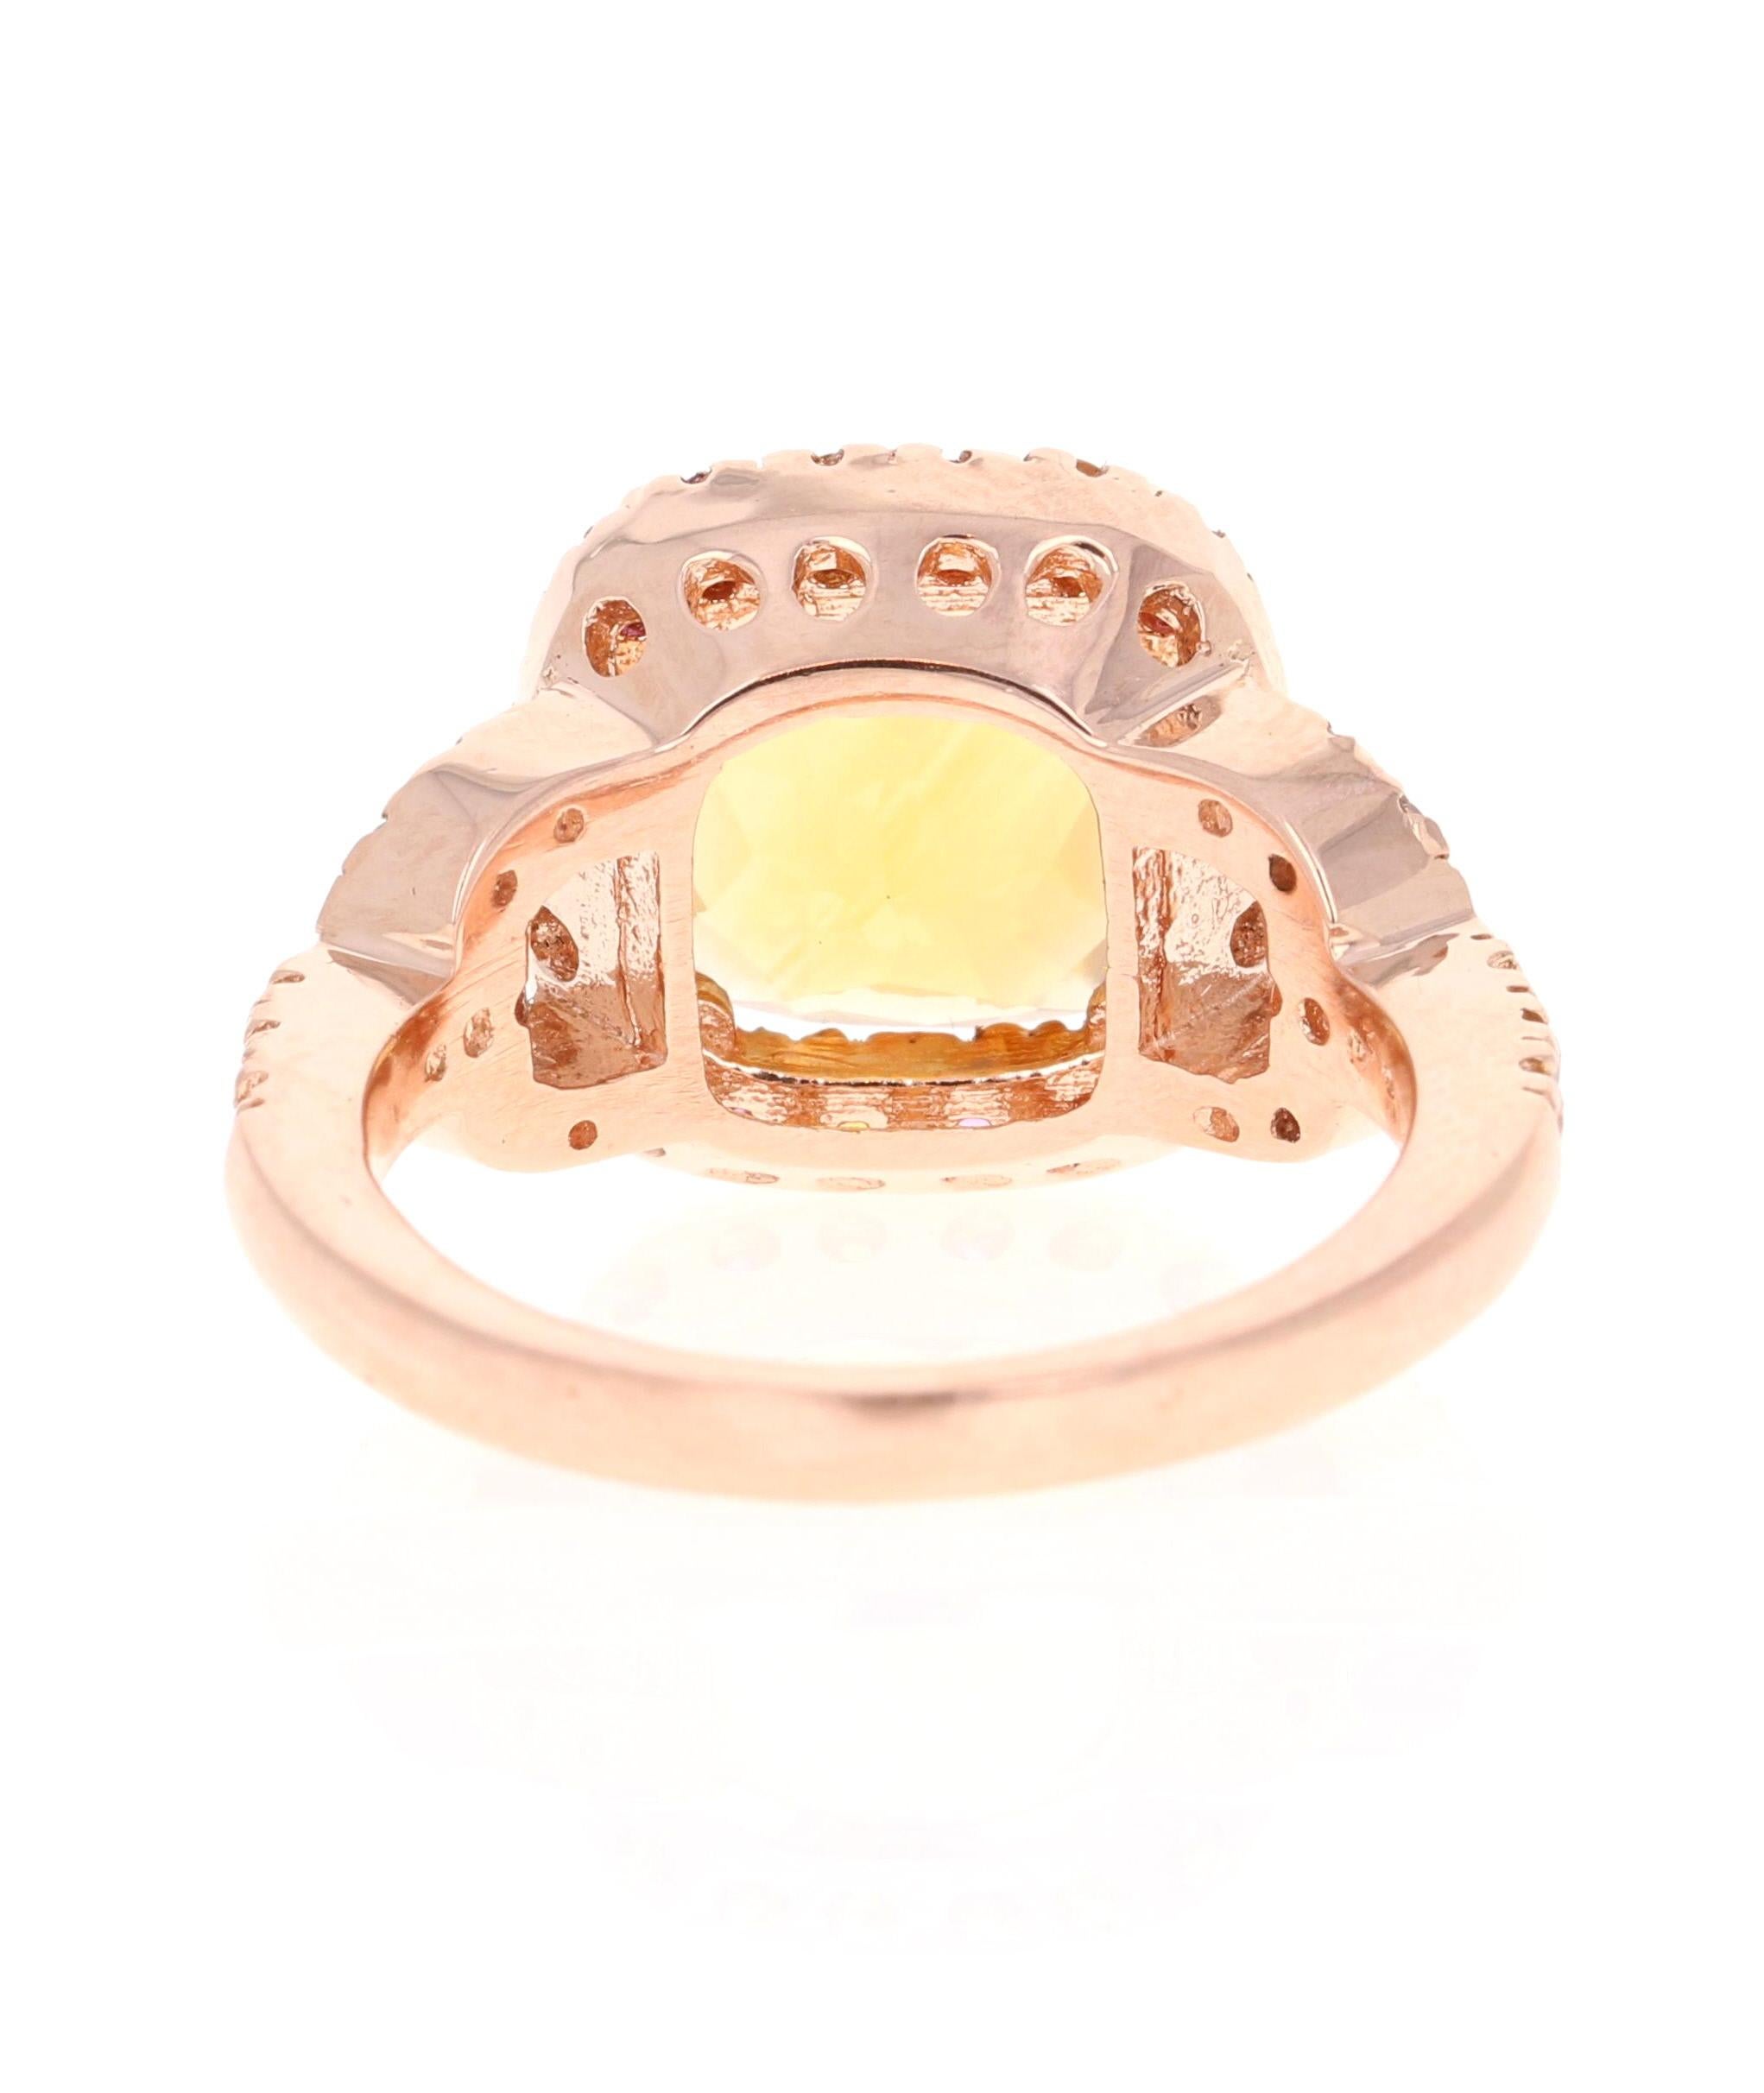 5.10 Carat Cushion Cut Citrine, Pink Sapphire Diamond 14 Karat Rose Gold Ring In New Condition For Sale In Los Angeles, CA